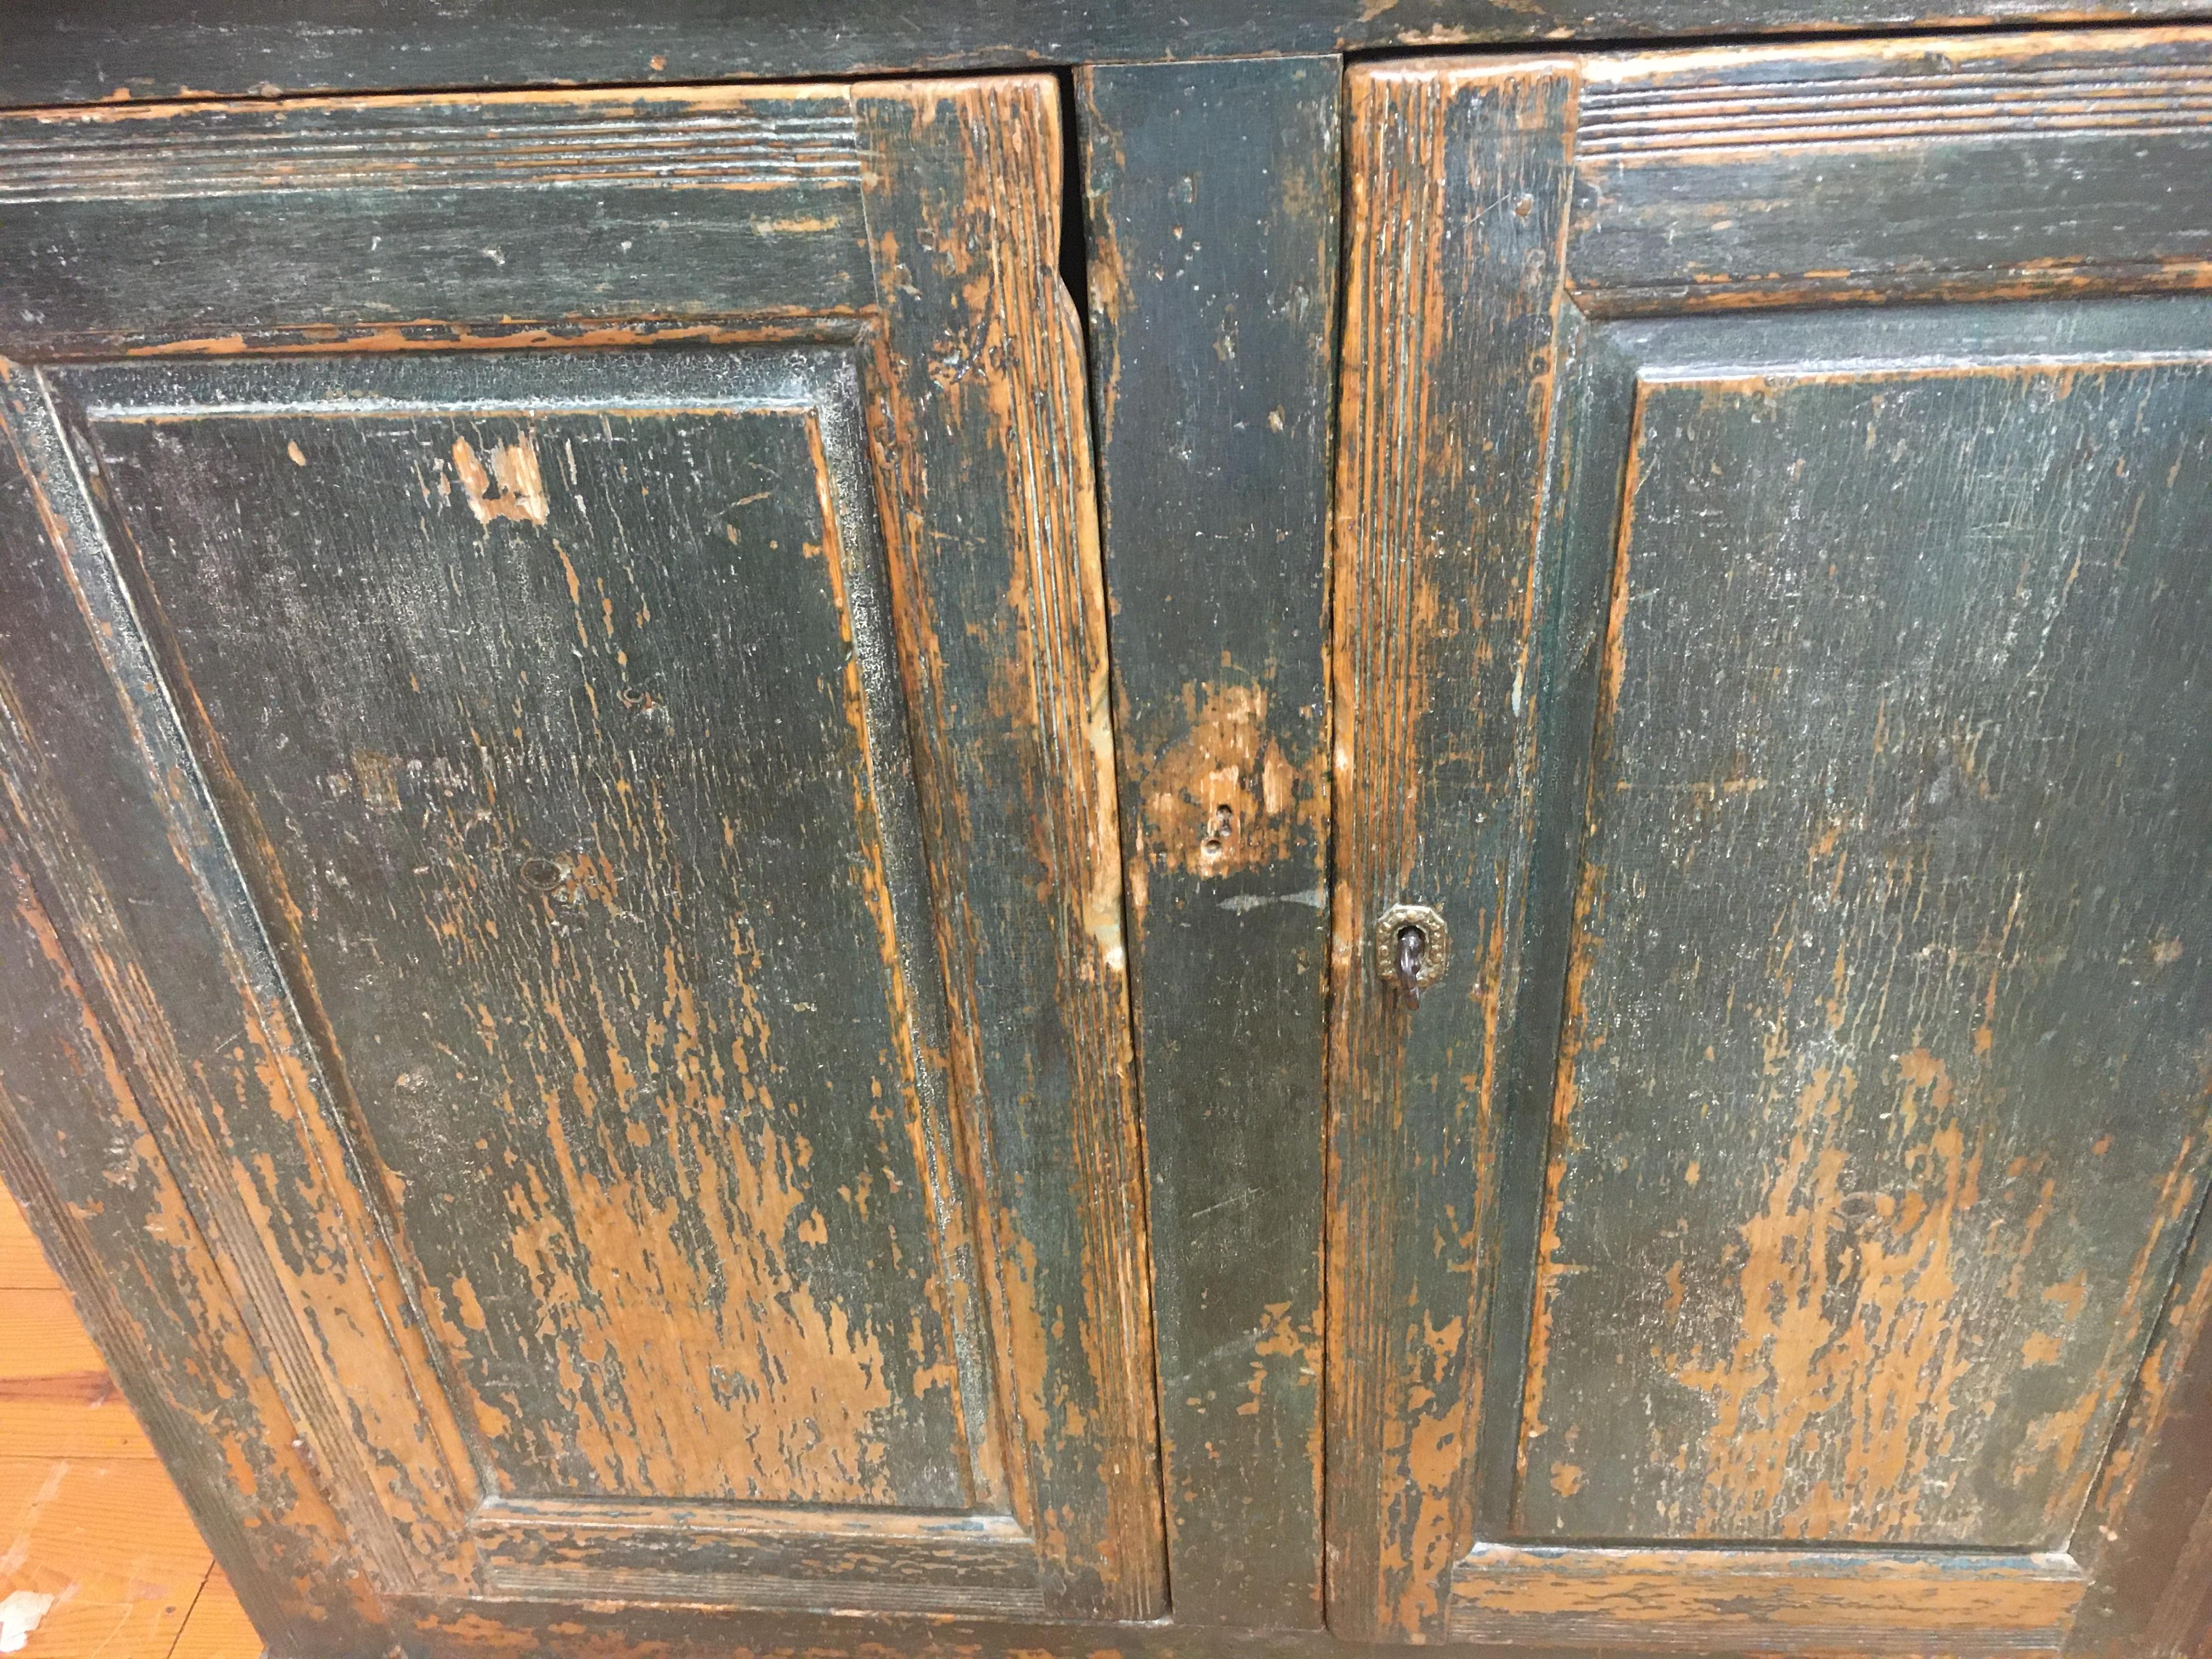 Pine, circa 1800, the best original painted large buffet we have found in the last 3 years. Blue or green in color and appropriately worn. This piece has raised panels and its original shelves inside for plenty of storage. Canadian furniture doesn't